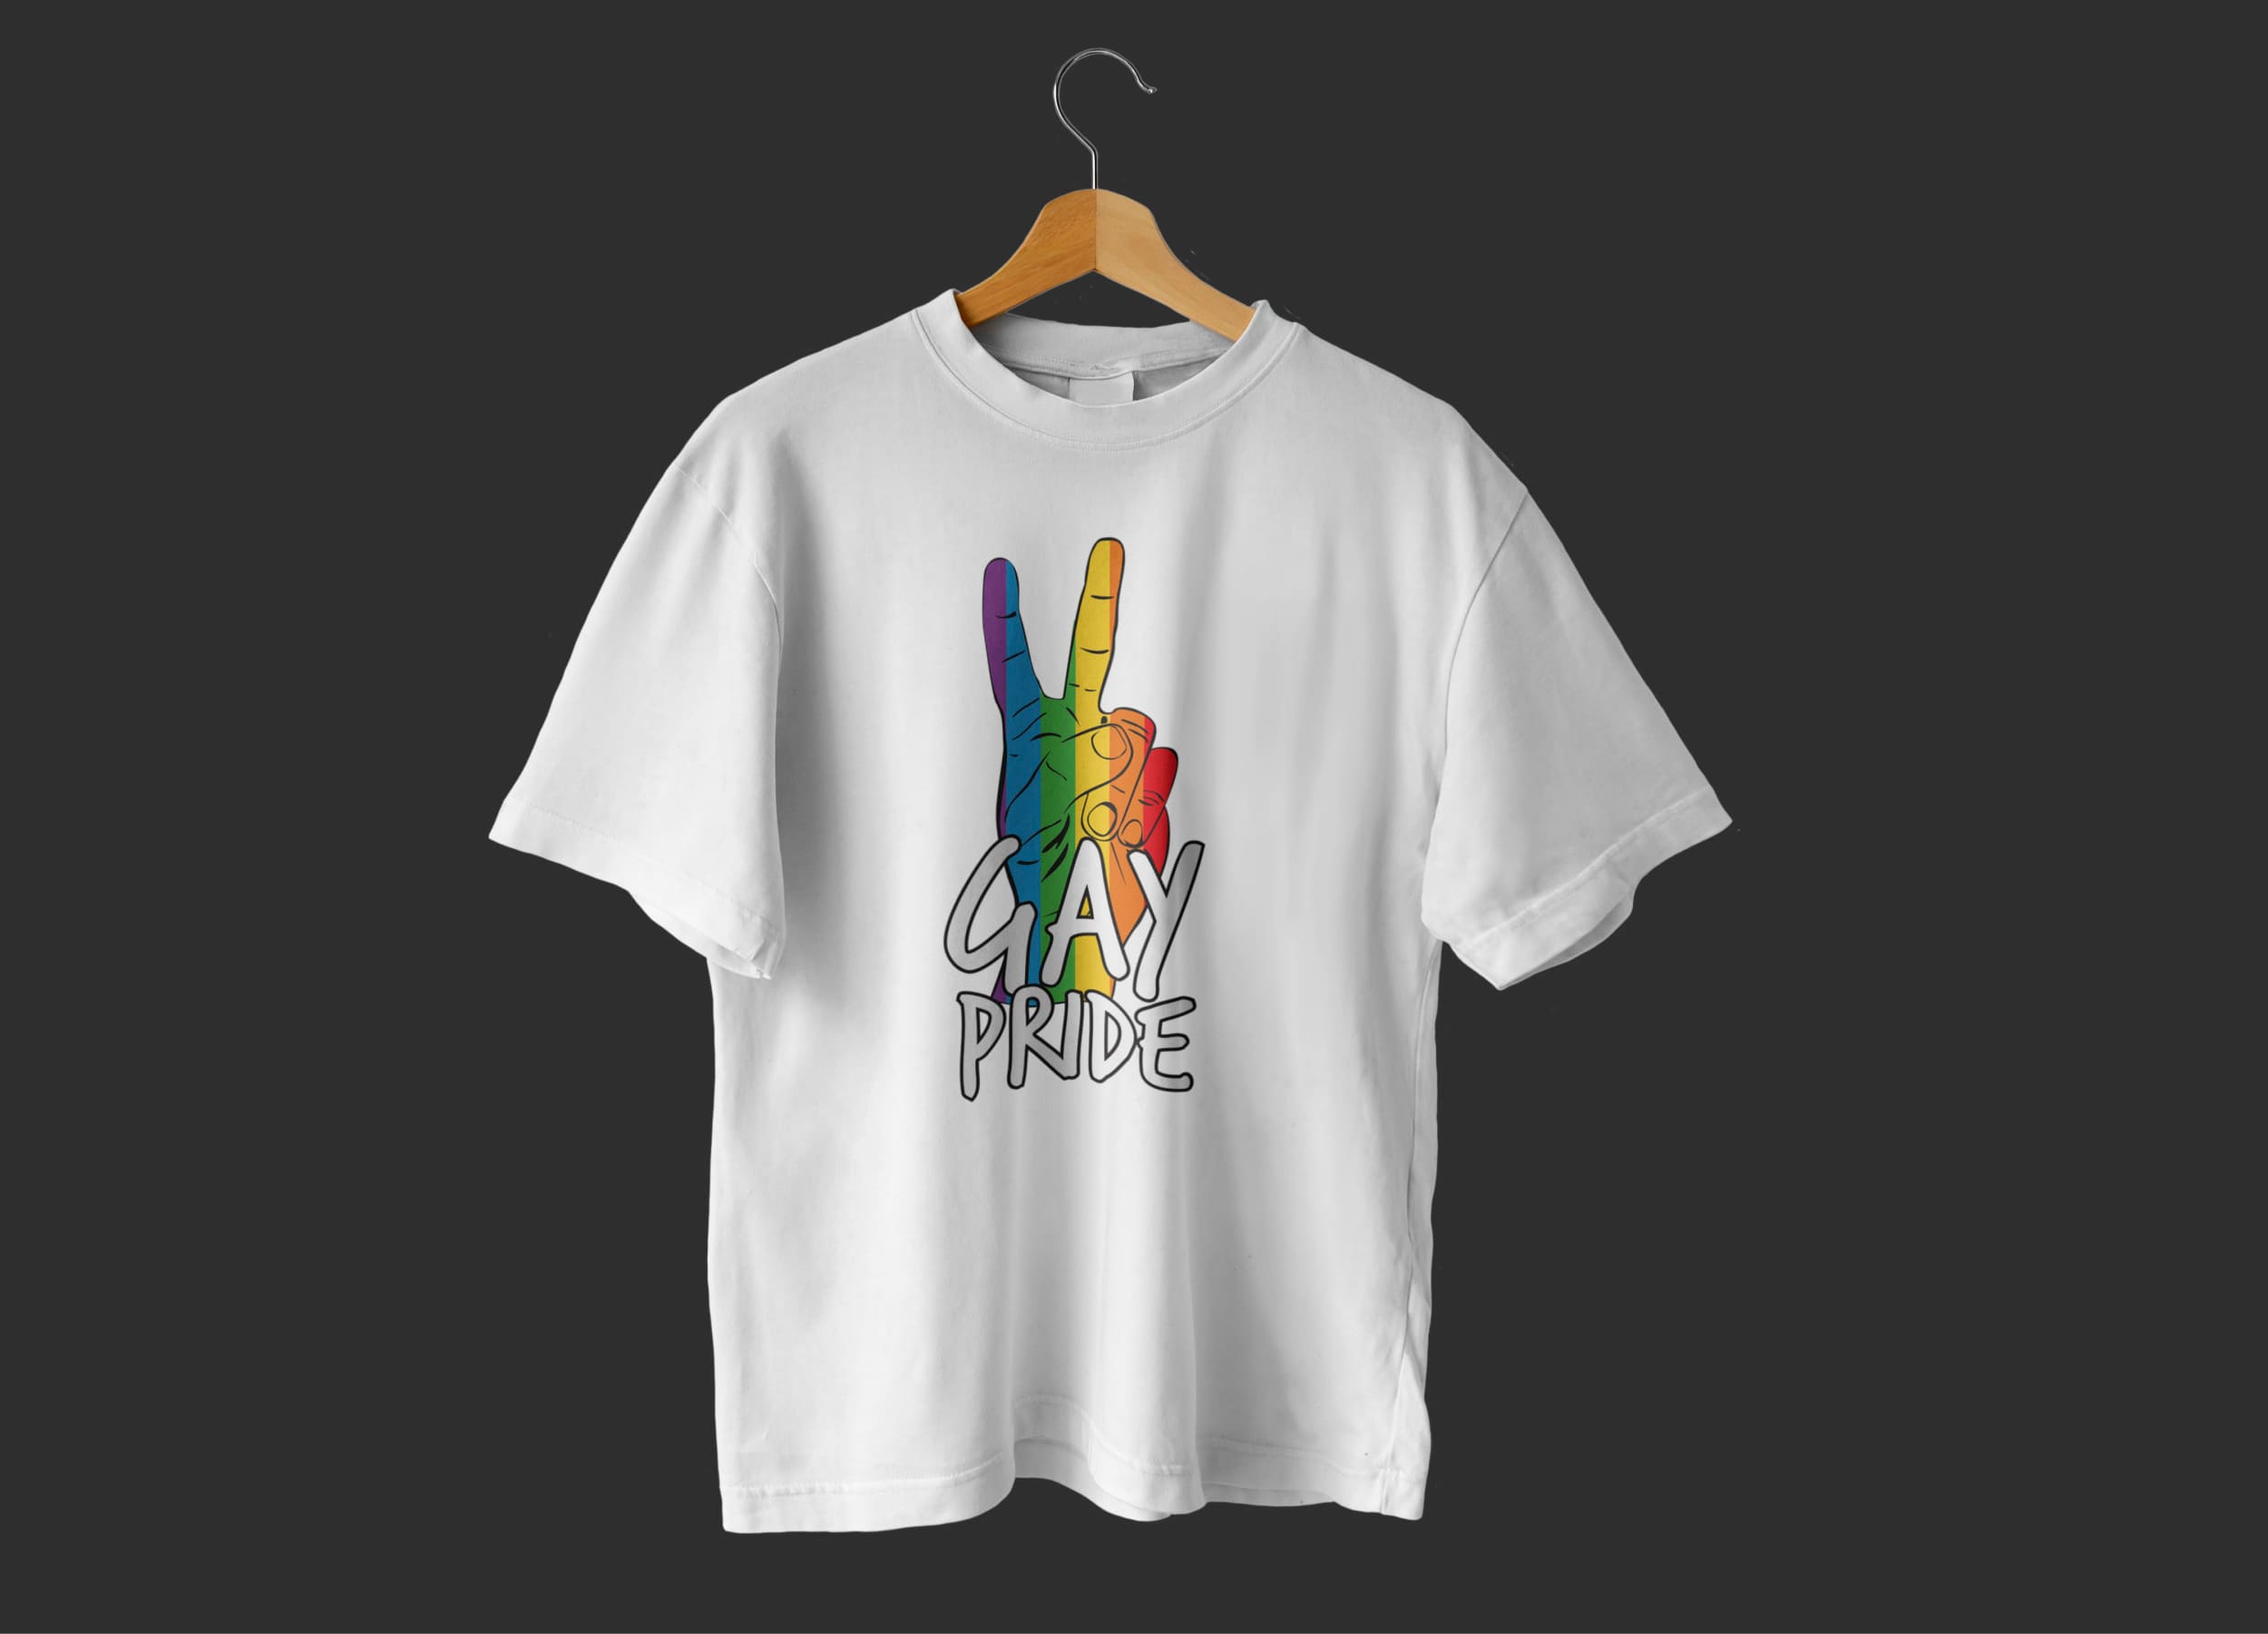 A white t-shirt with an image of a hand in the colors of the LGBT flag and the grey lettering "GAY pride" on a hanger, on a dark gray background.